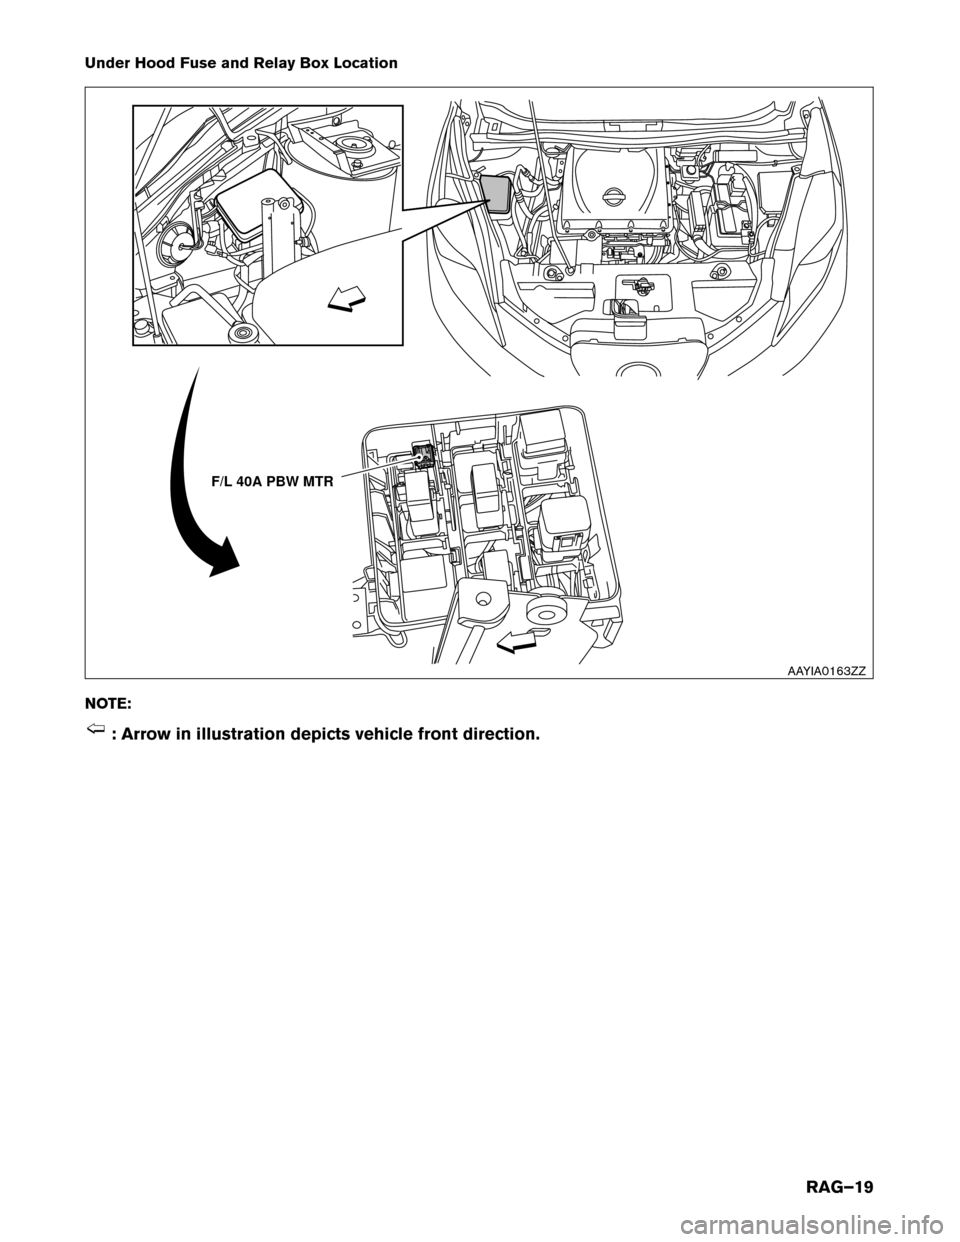 NISSAN LEAF 2016 1.G Roadside Assistance Guide Under Hood Fuse and Relay Box Location
NO
TE: : Arrow in illustration depicts vehicle front direction. F/L 40A PBW MTR
AAYIA0163ZZ
RAG–19 